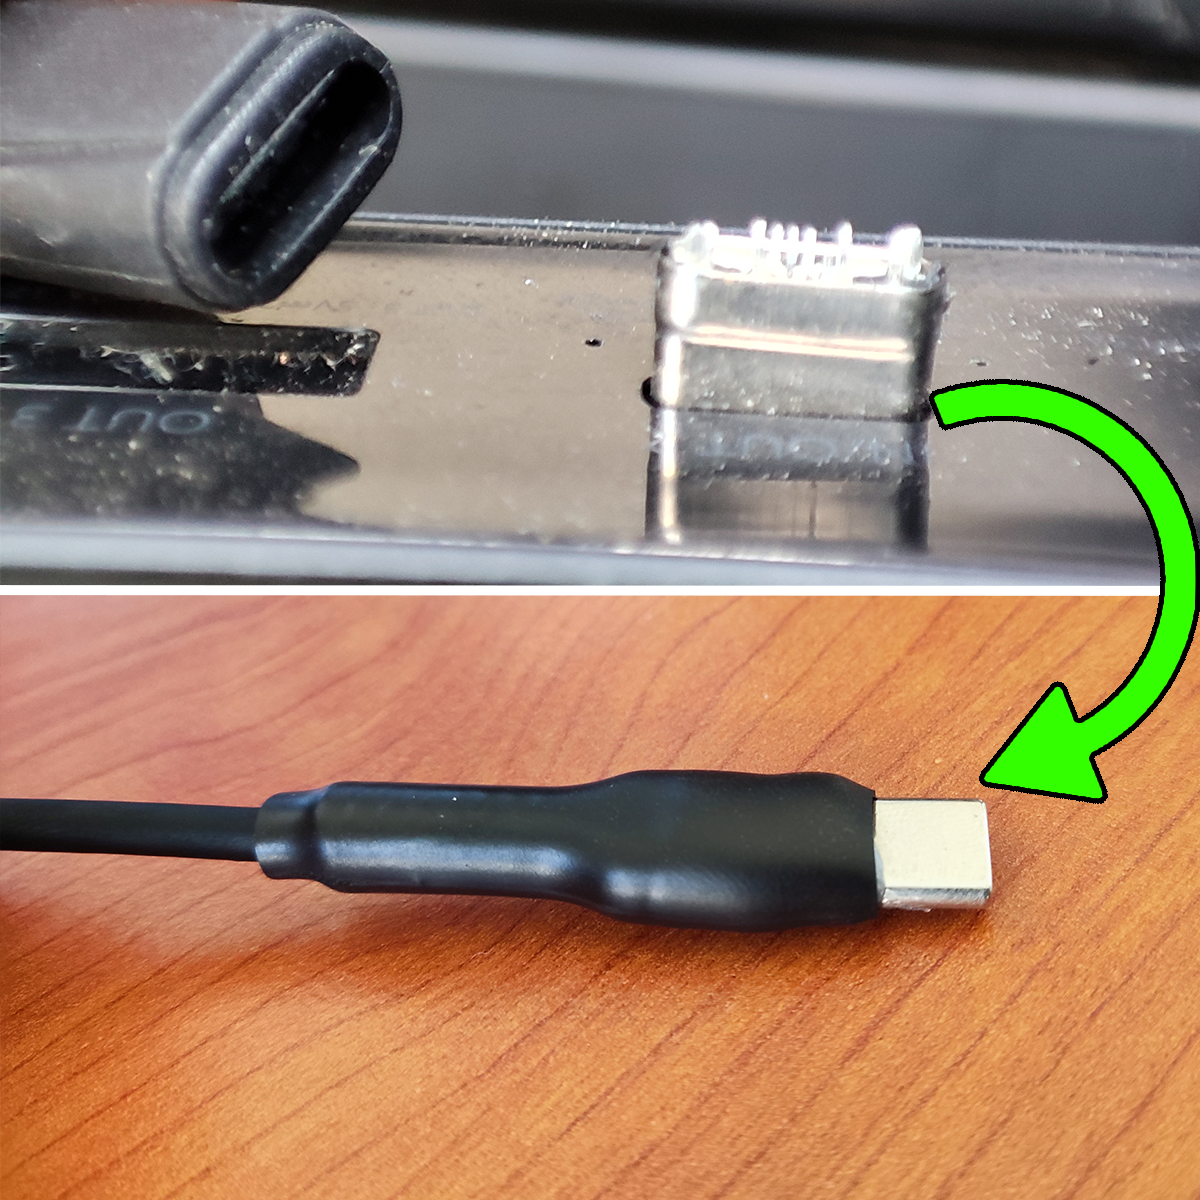 Reattaching a broken MiniWare cable type-c connector